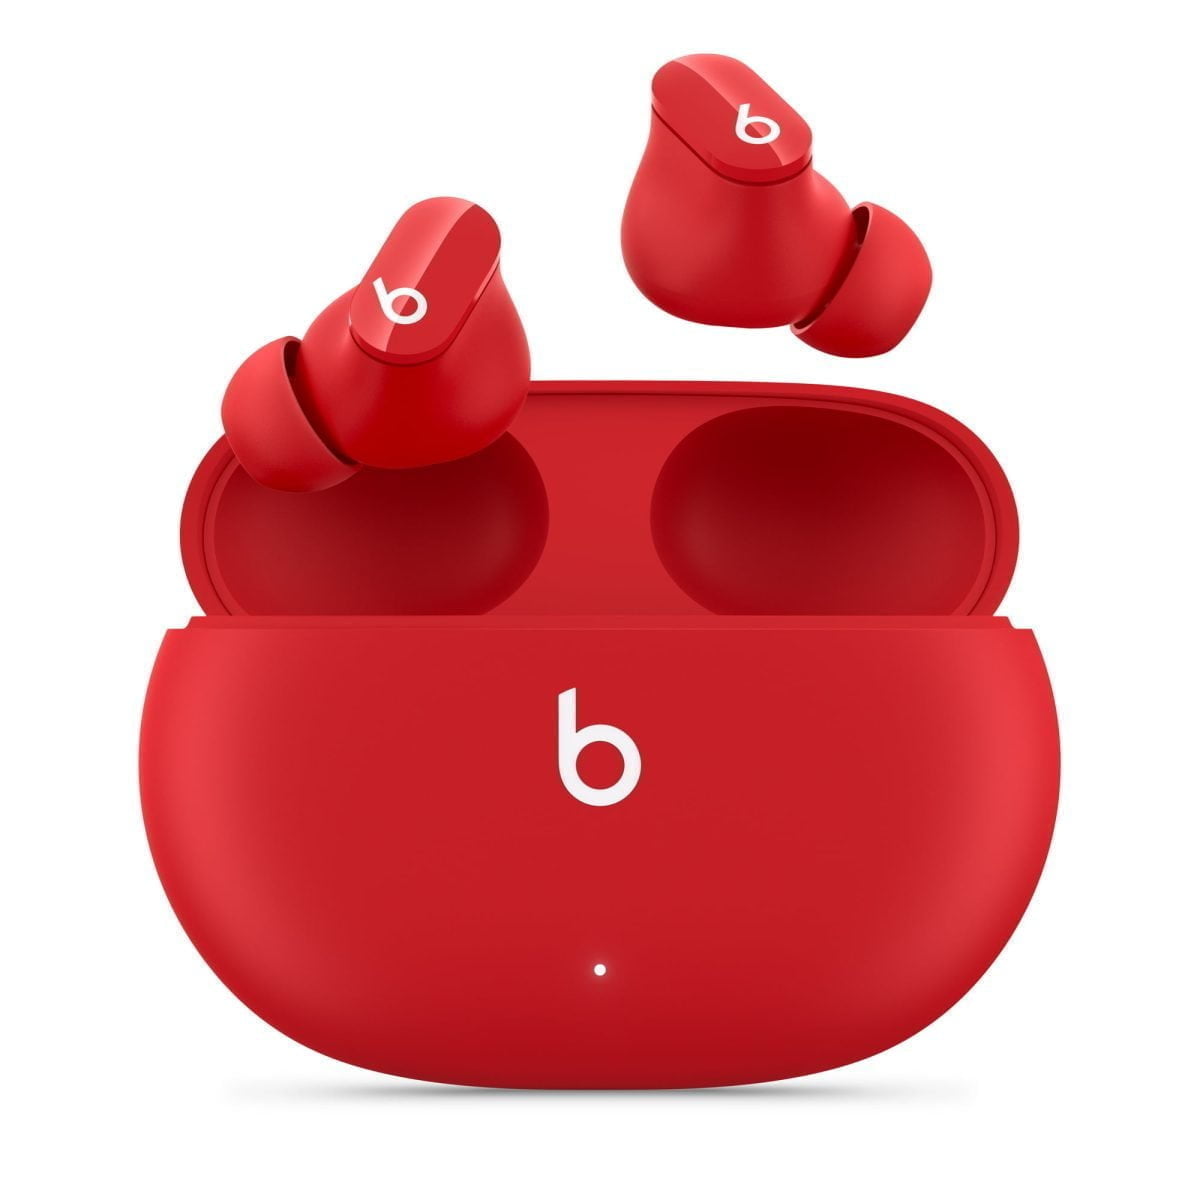 Mj503 Apple &Amp;Lt;H1 Data-Autom=&Amp;Quot;Sectiontitle&Amp;Quot;&Amp;Gt;Beats Studio Buds – True Wireless Noise Cancelling Earphones – Beats Red&Amp;Lt;/H1&Amp;Gt; &Amp;Lt;Div Class=&Amp;Quot;Rc-Pdsection-Mainpanel Column Large-9 Small-12&Amp;Quot;&Amp;Gt; &Amp;Lt;Div Class=&Amp;Quot;Para-List&Amp;Quot;&Amp;Gt; Custom Acoustic Platform Delivers Powerful, Balanced Sound &Amp;Lt;/Div&Amp;Gt; &Amp;Lt;Div Class=&Amp;Quot;Para-List&Amp;Quot;&Amp;Gt; Active Noise Cancelling (Anc) Blocks External Noise For Immersive Listening &Amp;Lt;/Div&Amp;Gt; &Amp;Lt;Div Class=&Amp;Quot;Para-List&Amp;Quot;&Amp;Gt; Easily Switch To Transparency Mode To Hear The World Around You &Amp;Lt;/Div&Amp;Gt; &Amp;Lt;Div Class=&Amp;Quot;Para-List&Amp;Quot;&Amp;Gt; Simple One-Touch Pairing For Both Apple&Amp;Lt;Sup&Amp;Gt;6&Amp;Lt;/Sup&Amp;Gt; And Android&Amp;Lt;Sup&Amp;Gt;7&Amp;Lt;/Sup&Amp;Gt; Devices &Amp;Lt;/Div&Amp;Gt; &Amp;Lt;Div Class=&Amp;Quot;Para-List&Amp;Quot;&Amp;Gt; High-Quality Call Performance And Voice Assistant Interaction Via Dual Beamforming Mics &Amp;Lt;/Div&Amp;Gt; &Amp;Lt;Div Class=&Amp;Quot;Para-List&Amp;Quot;&Amp;Gt; Ipx4-Rated Sweat And Water Resistant Wireless Earbuds&Amp;Lt;Sup&Amp;Gt;4&Amp;Lt;/Sup&Amp;Gt; &Amp;Lt;/Div&Amp;Gt; &Amp;Lt;Div Class=&Amp;Quot;Para-List&Amp;Quot;&Amp;Gt; Three Soft Eartip Sizes For A Stable And Comfortable Fit While Ensuring An Optimal Acoustic Seal &Amp;Lt;/Div&Amp;Gt; &Amp;Lt;Div Class=&Amp;Quot;Para-List&Amp;Quot;&Amp;Gt; Up To 8 Hours Of Listening Time&Amp;Lt;Sup&Amp;Gt;1&Amp;Lt;/Sup&Amp;Gt; (Up To 24 Hours Combined With Pocket-Sized Charging Case)&Amp;Lt;Sup&Amp;Gt;2&Amp;Lt;/Sup&Amp;Gt; &Amp;Lt;/Div&Amp;Gt; &Amp;Lt;Div Class=&Amp;Quot;Para-List&Amp;Quot;&Amp;Gt; Activate Siri Hands-Free Just By Saying “Hey Siri”&Amp;Lt;Sup&Amp;Gt;8&Amp;Lt;/Sup&Amp;Gt; &Amp;Lt;/Div&Amp;Gt; &Amp;Lt;Div Class=&Amp;Quot;Para-List&Amp;Quot;&Amp;Gt; Industry-Leading Class 1 Bluetooth For Extended Range And Fewer Dropouts &Amp;Lt;/Div&Amp;Gt; &Amp;Lt;Div Class=&Amp;Quot;Para-List As-Pdp-Lastparalist&Amp;Quot;&Amp;Gt; Usb-C Universal Charging &Amp;Lt;/Div&Amp;Gt; &Amp;Lt;/Div&Amp;Gt; Beats Studio Buds Red Beats Studio Buds – True Wireless Noise Cancelling Earphones – Beats Red